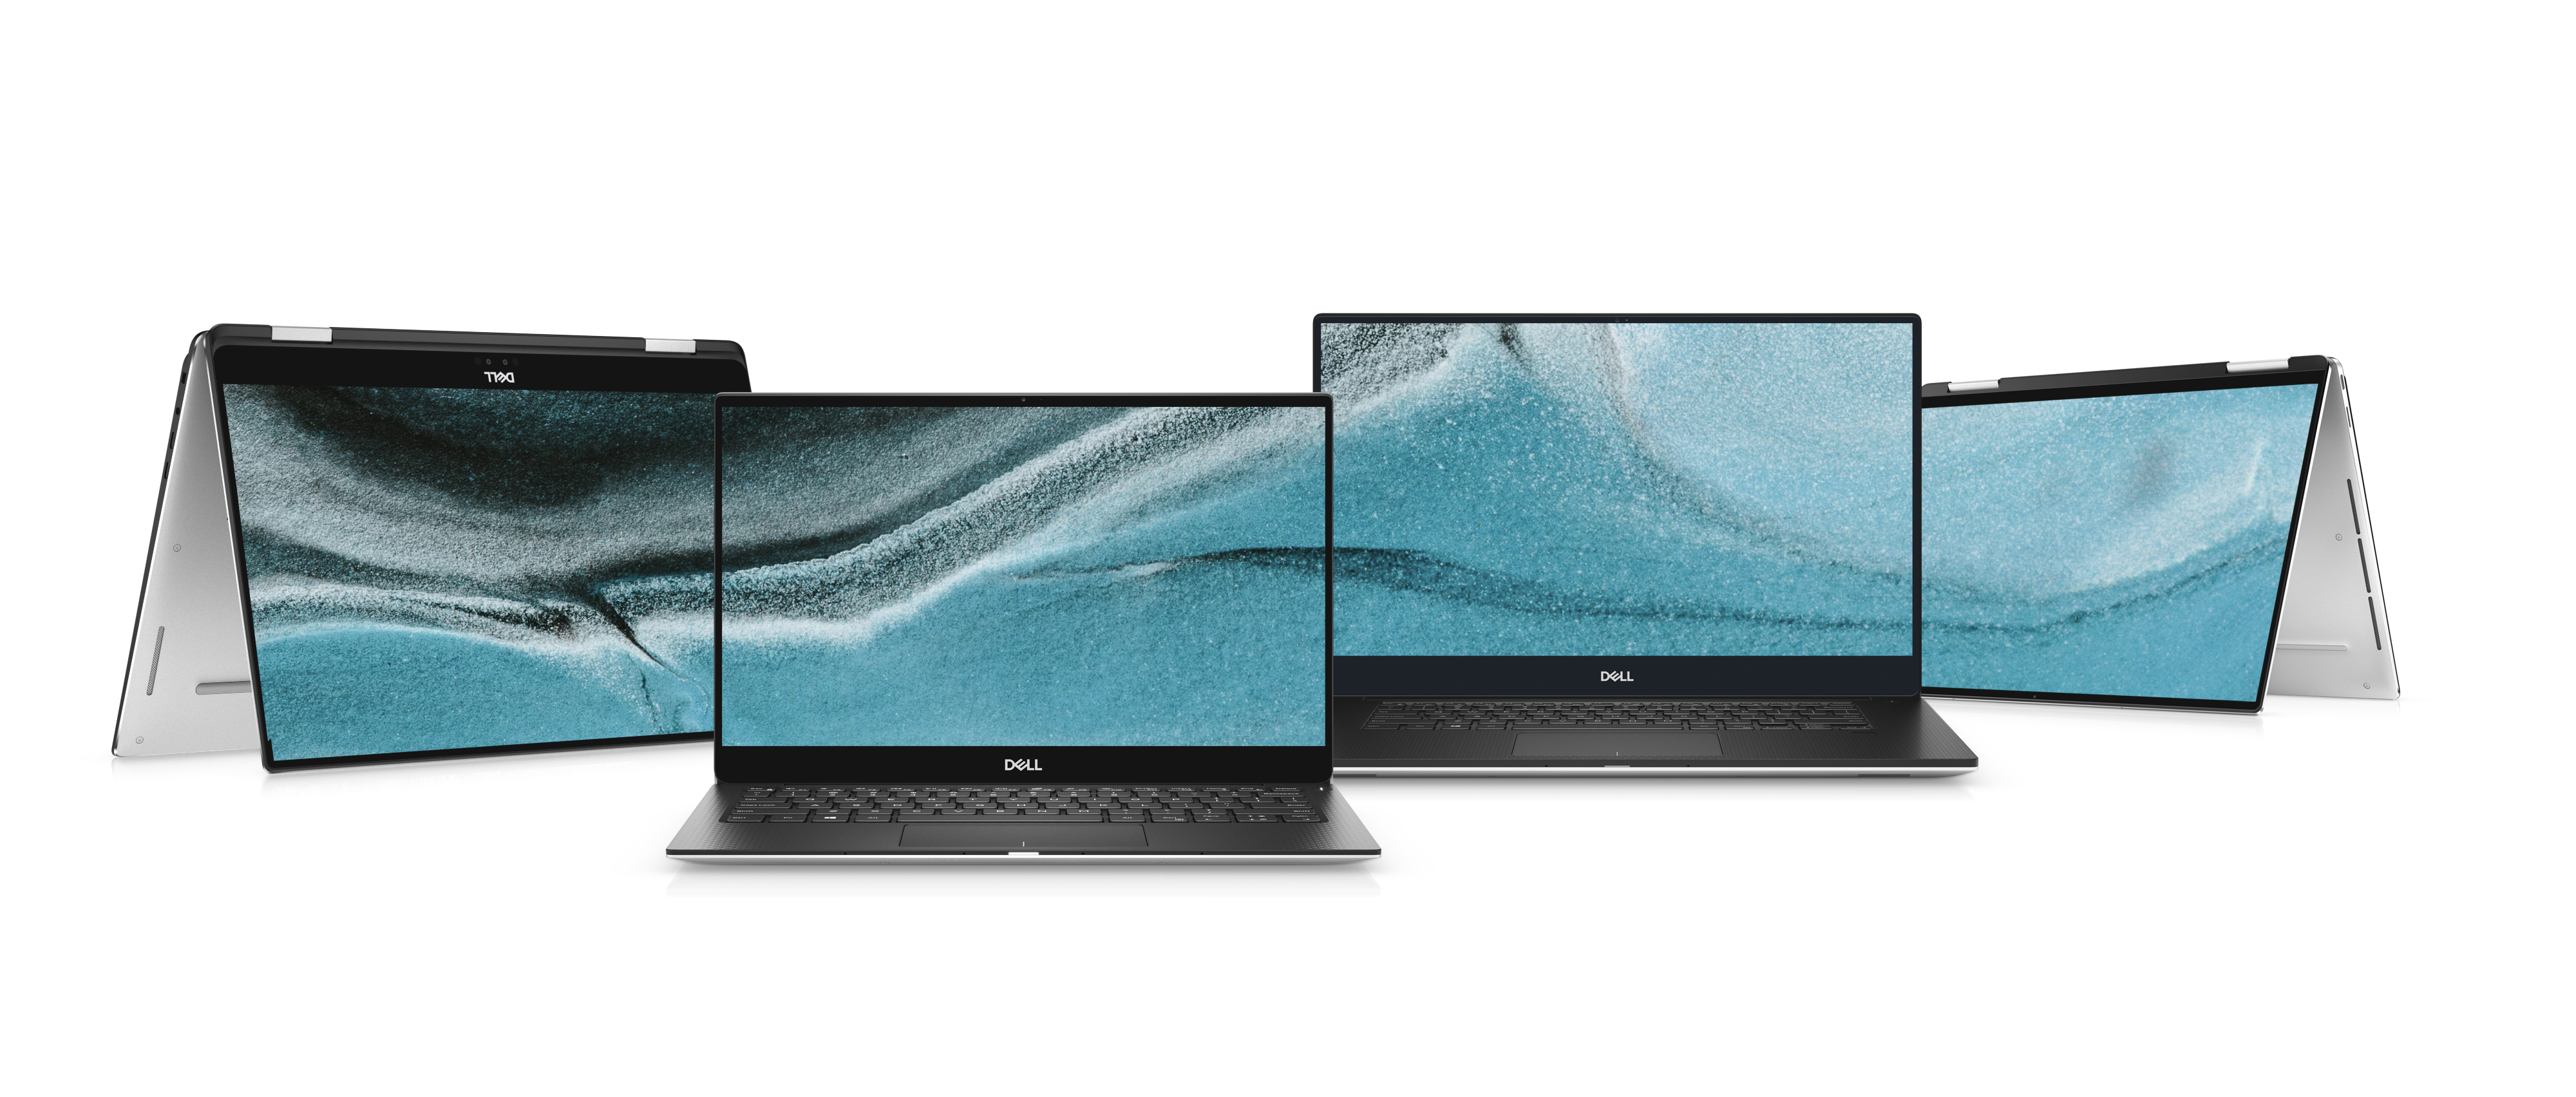 Ноутбук XPS 13 2-in-1